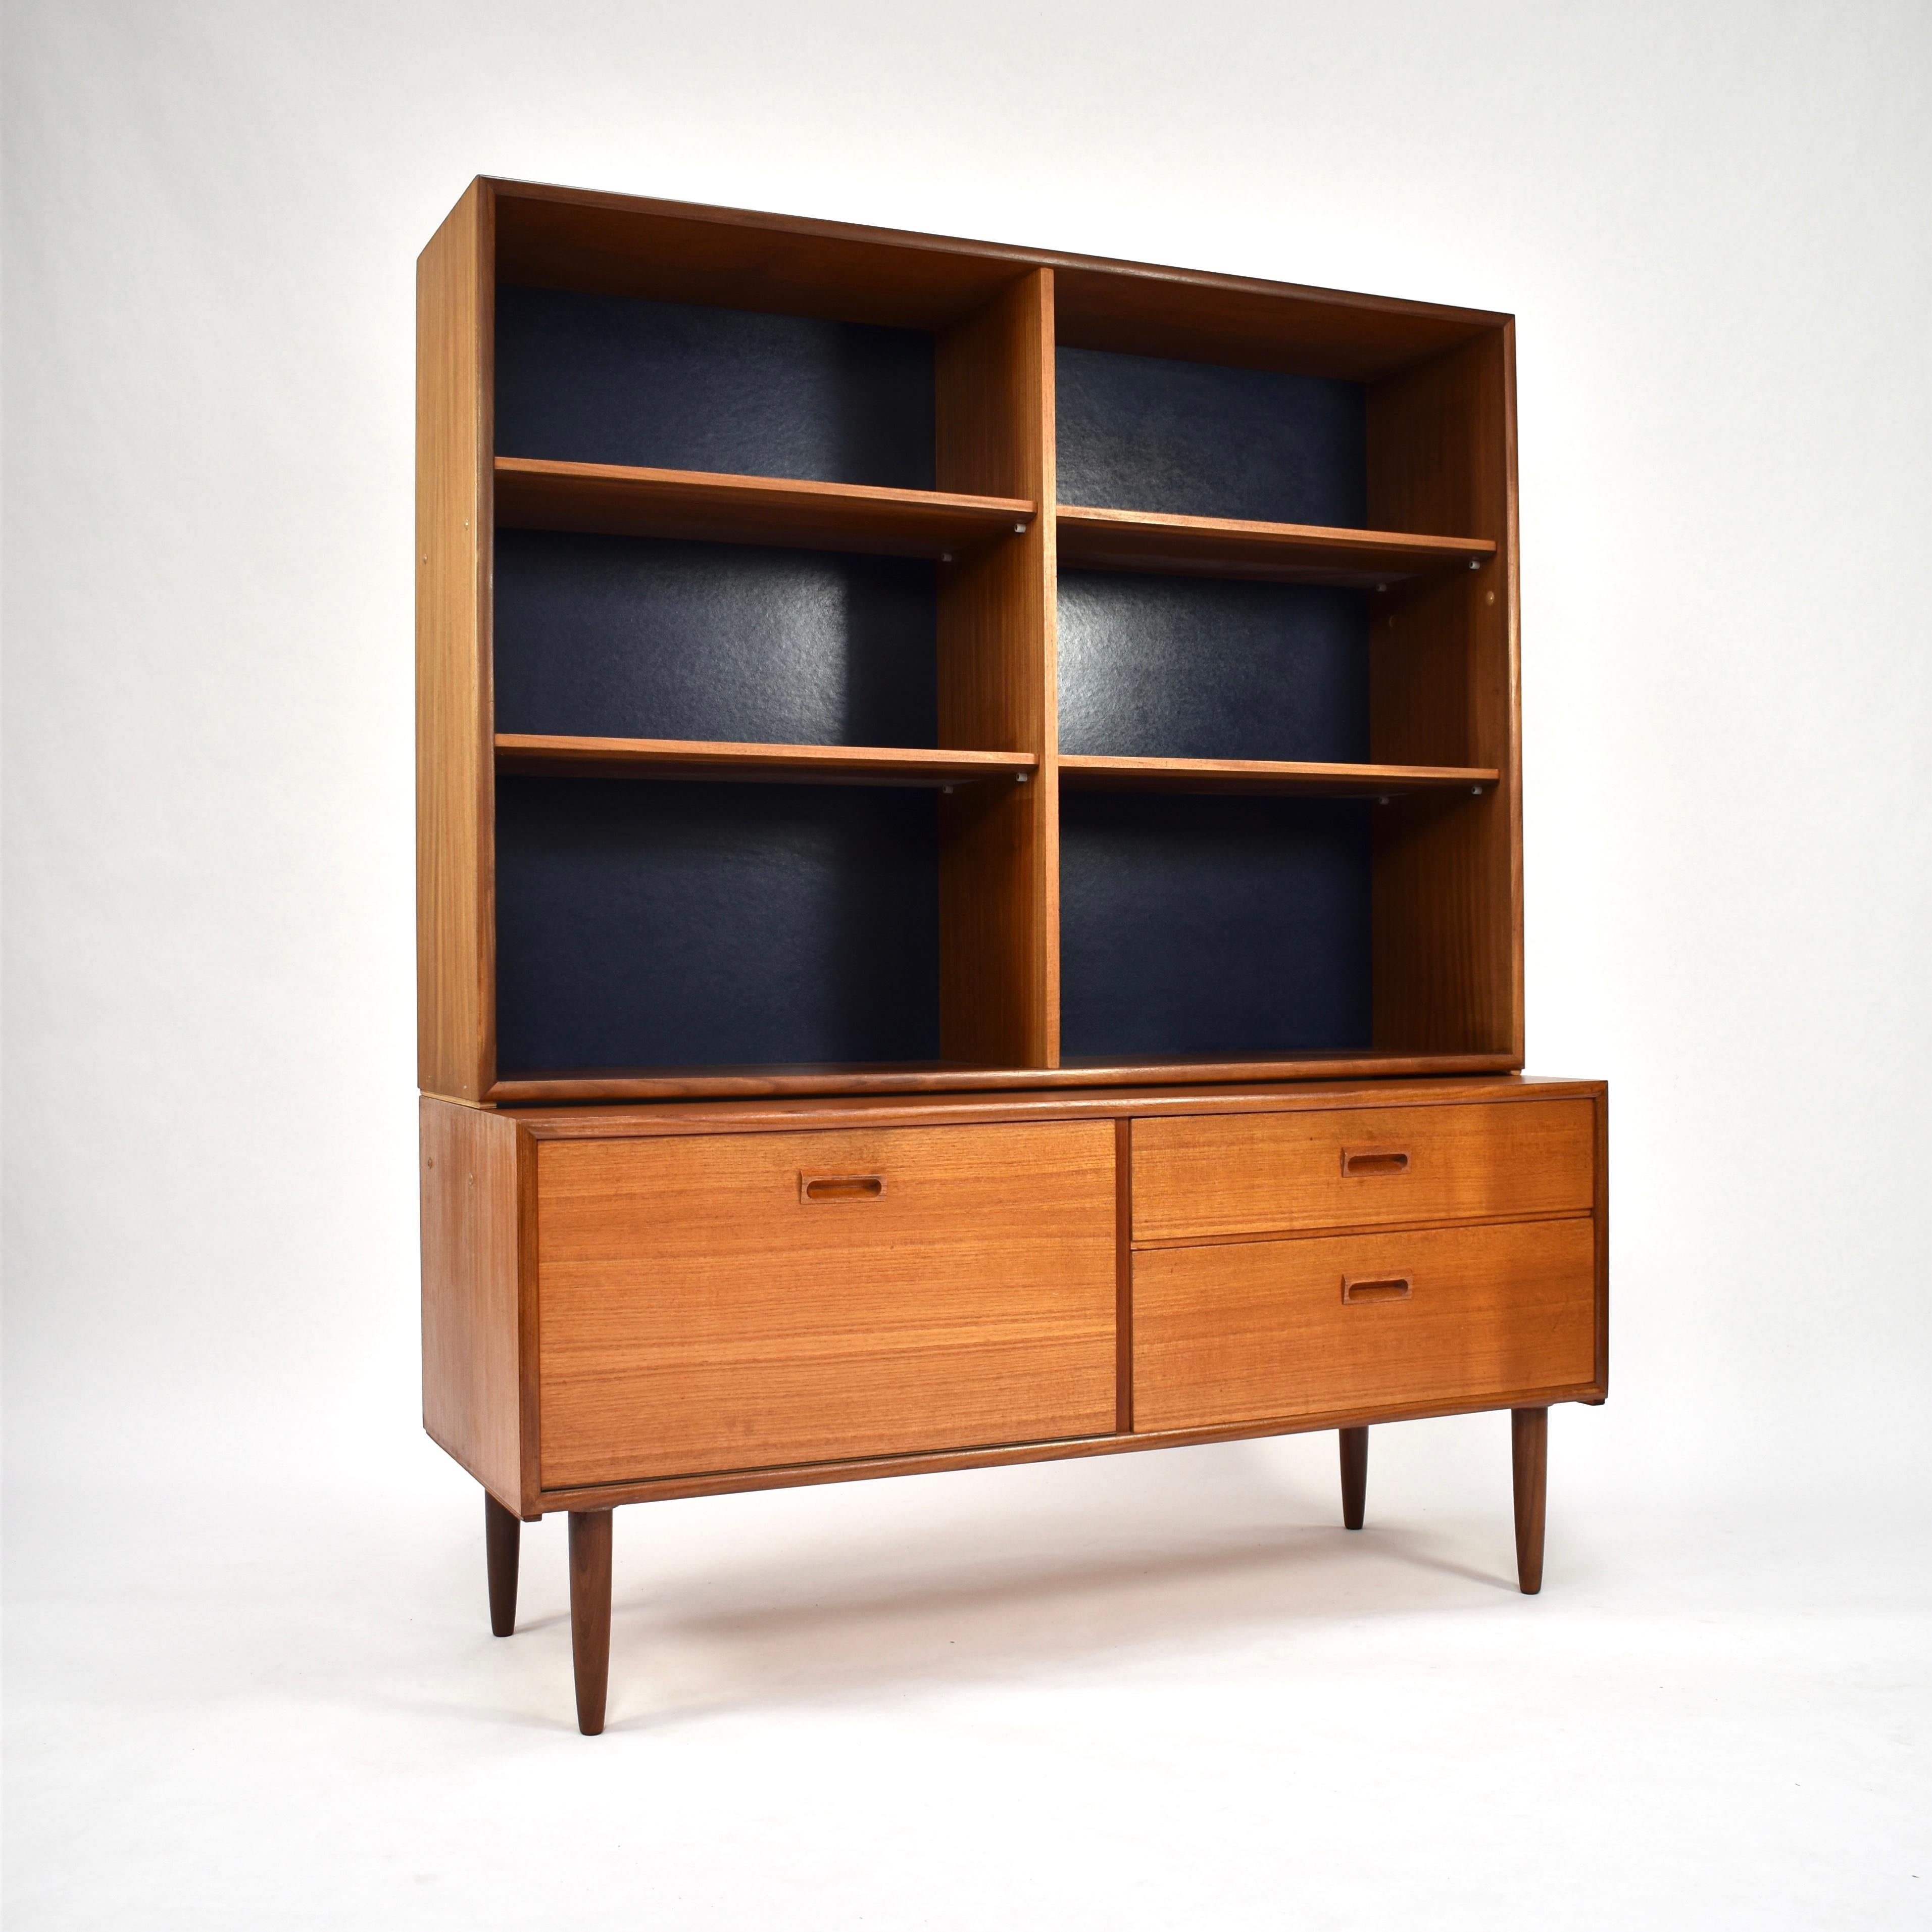 Danish bookcase cabinet in teak with dark blue back (looks black in images).
The cabinet consists of two parts; sideboard and shelve part. So it can also be used seperate.

Designer: Unknown

Manufacturer: Unknown

Country: Denmark

Model: